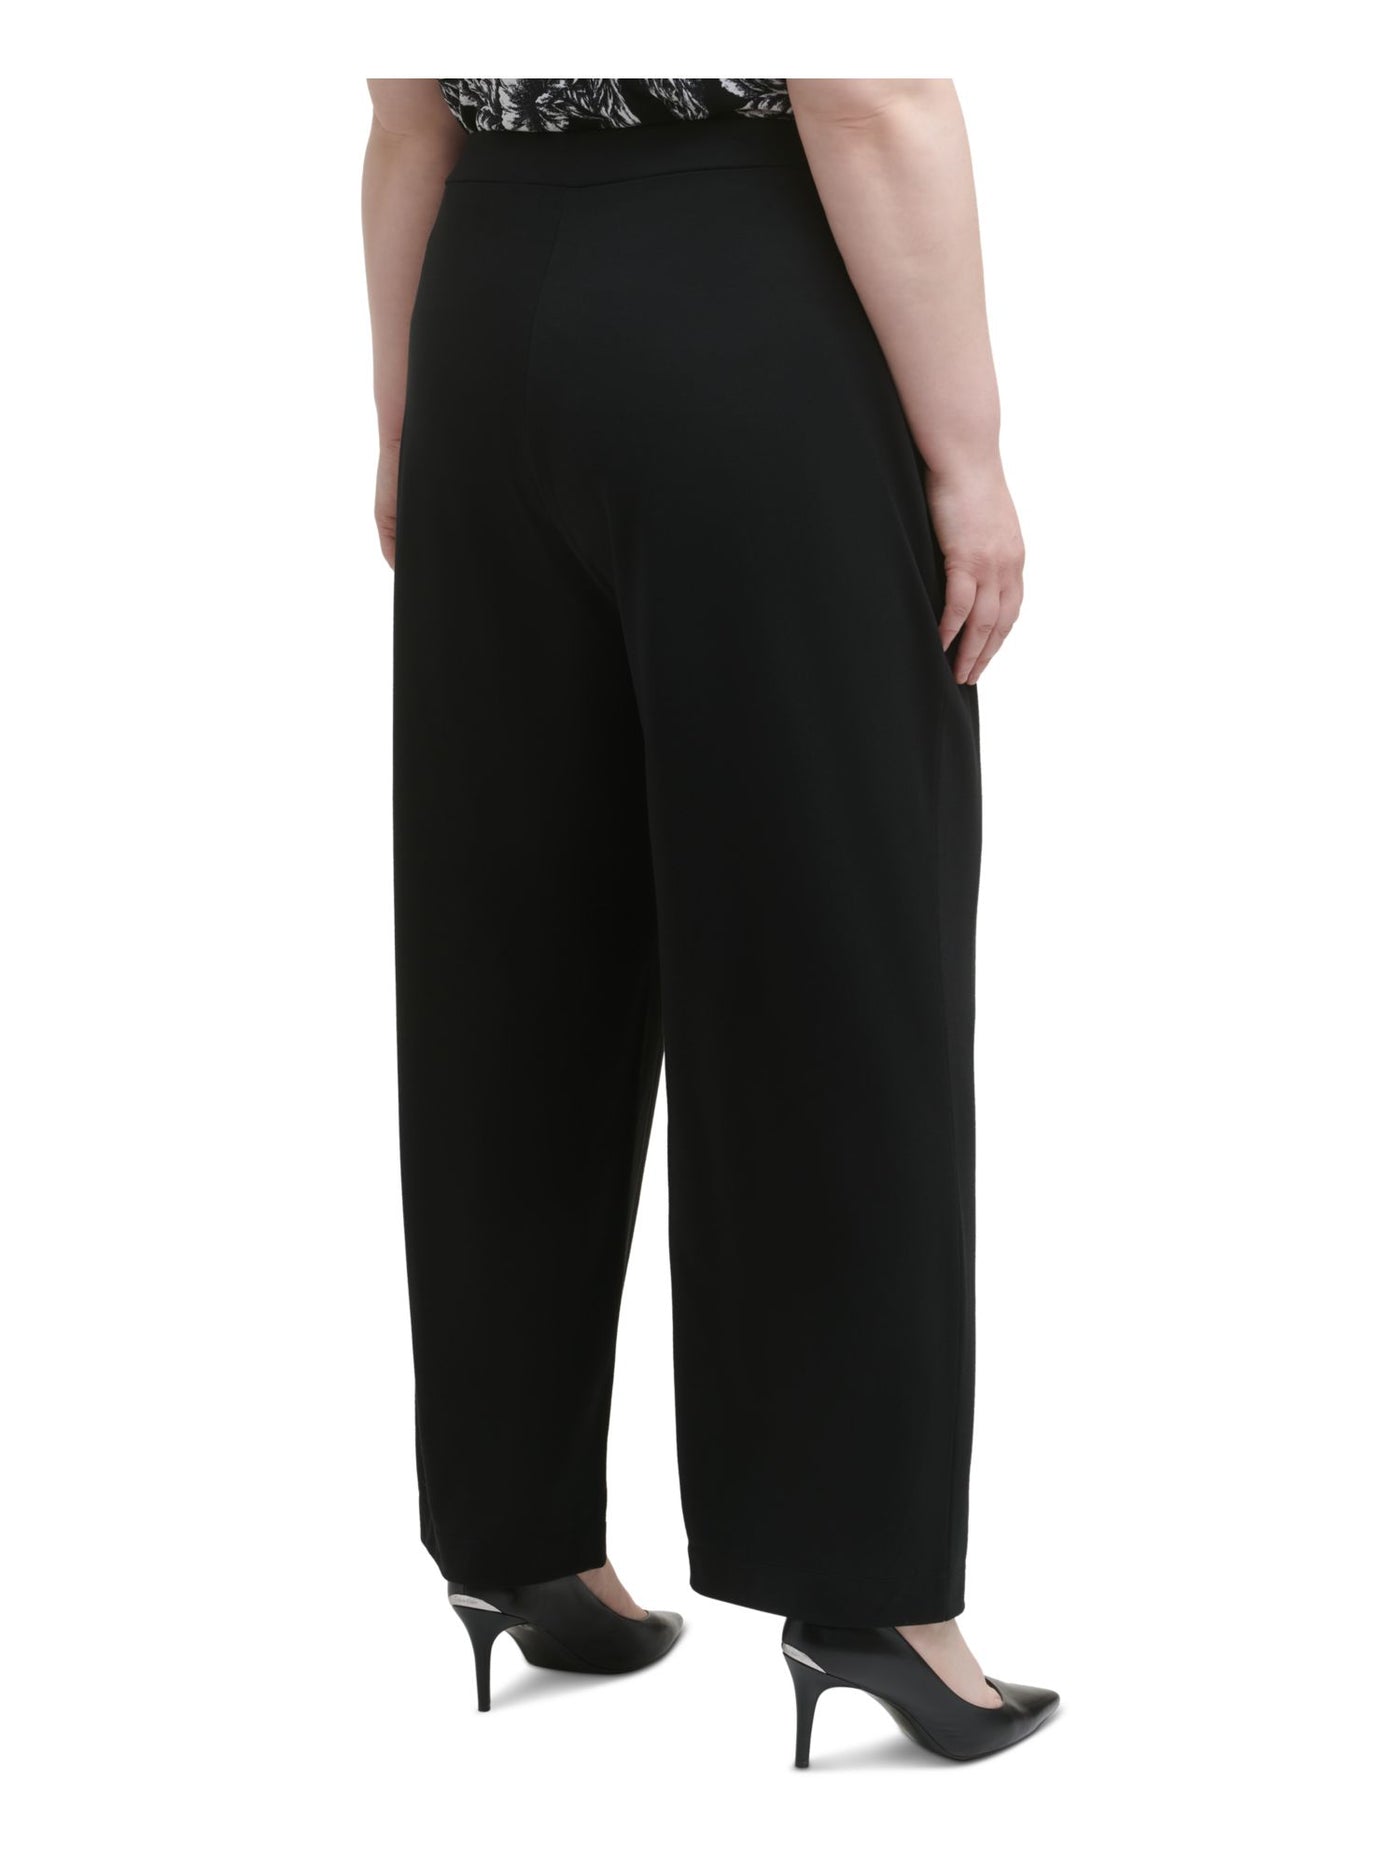 CALVIN KLEIN Womens Black Stretch Pocketed Pull-on Mid-rise Wear To Work Straight leg Pants Plus 2X